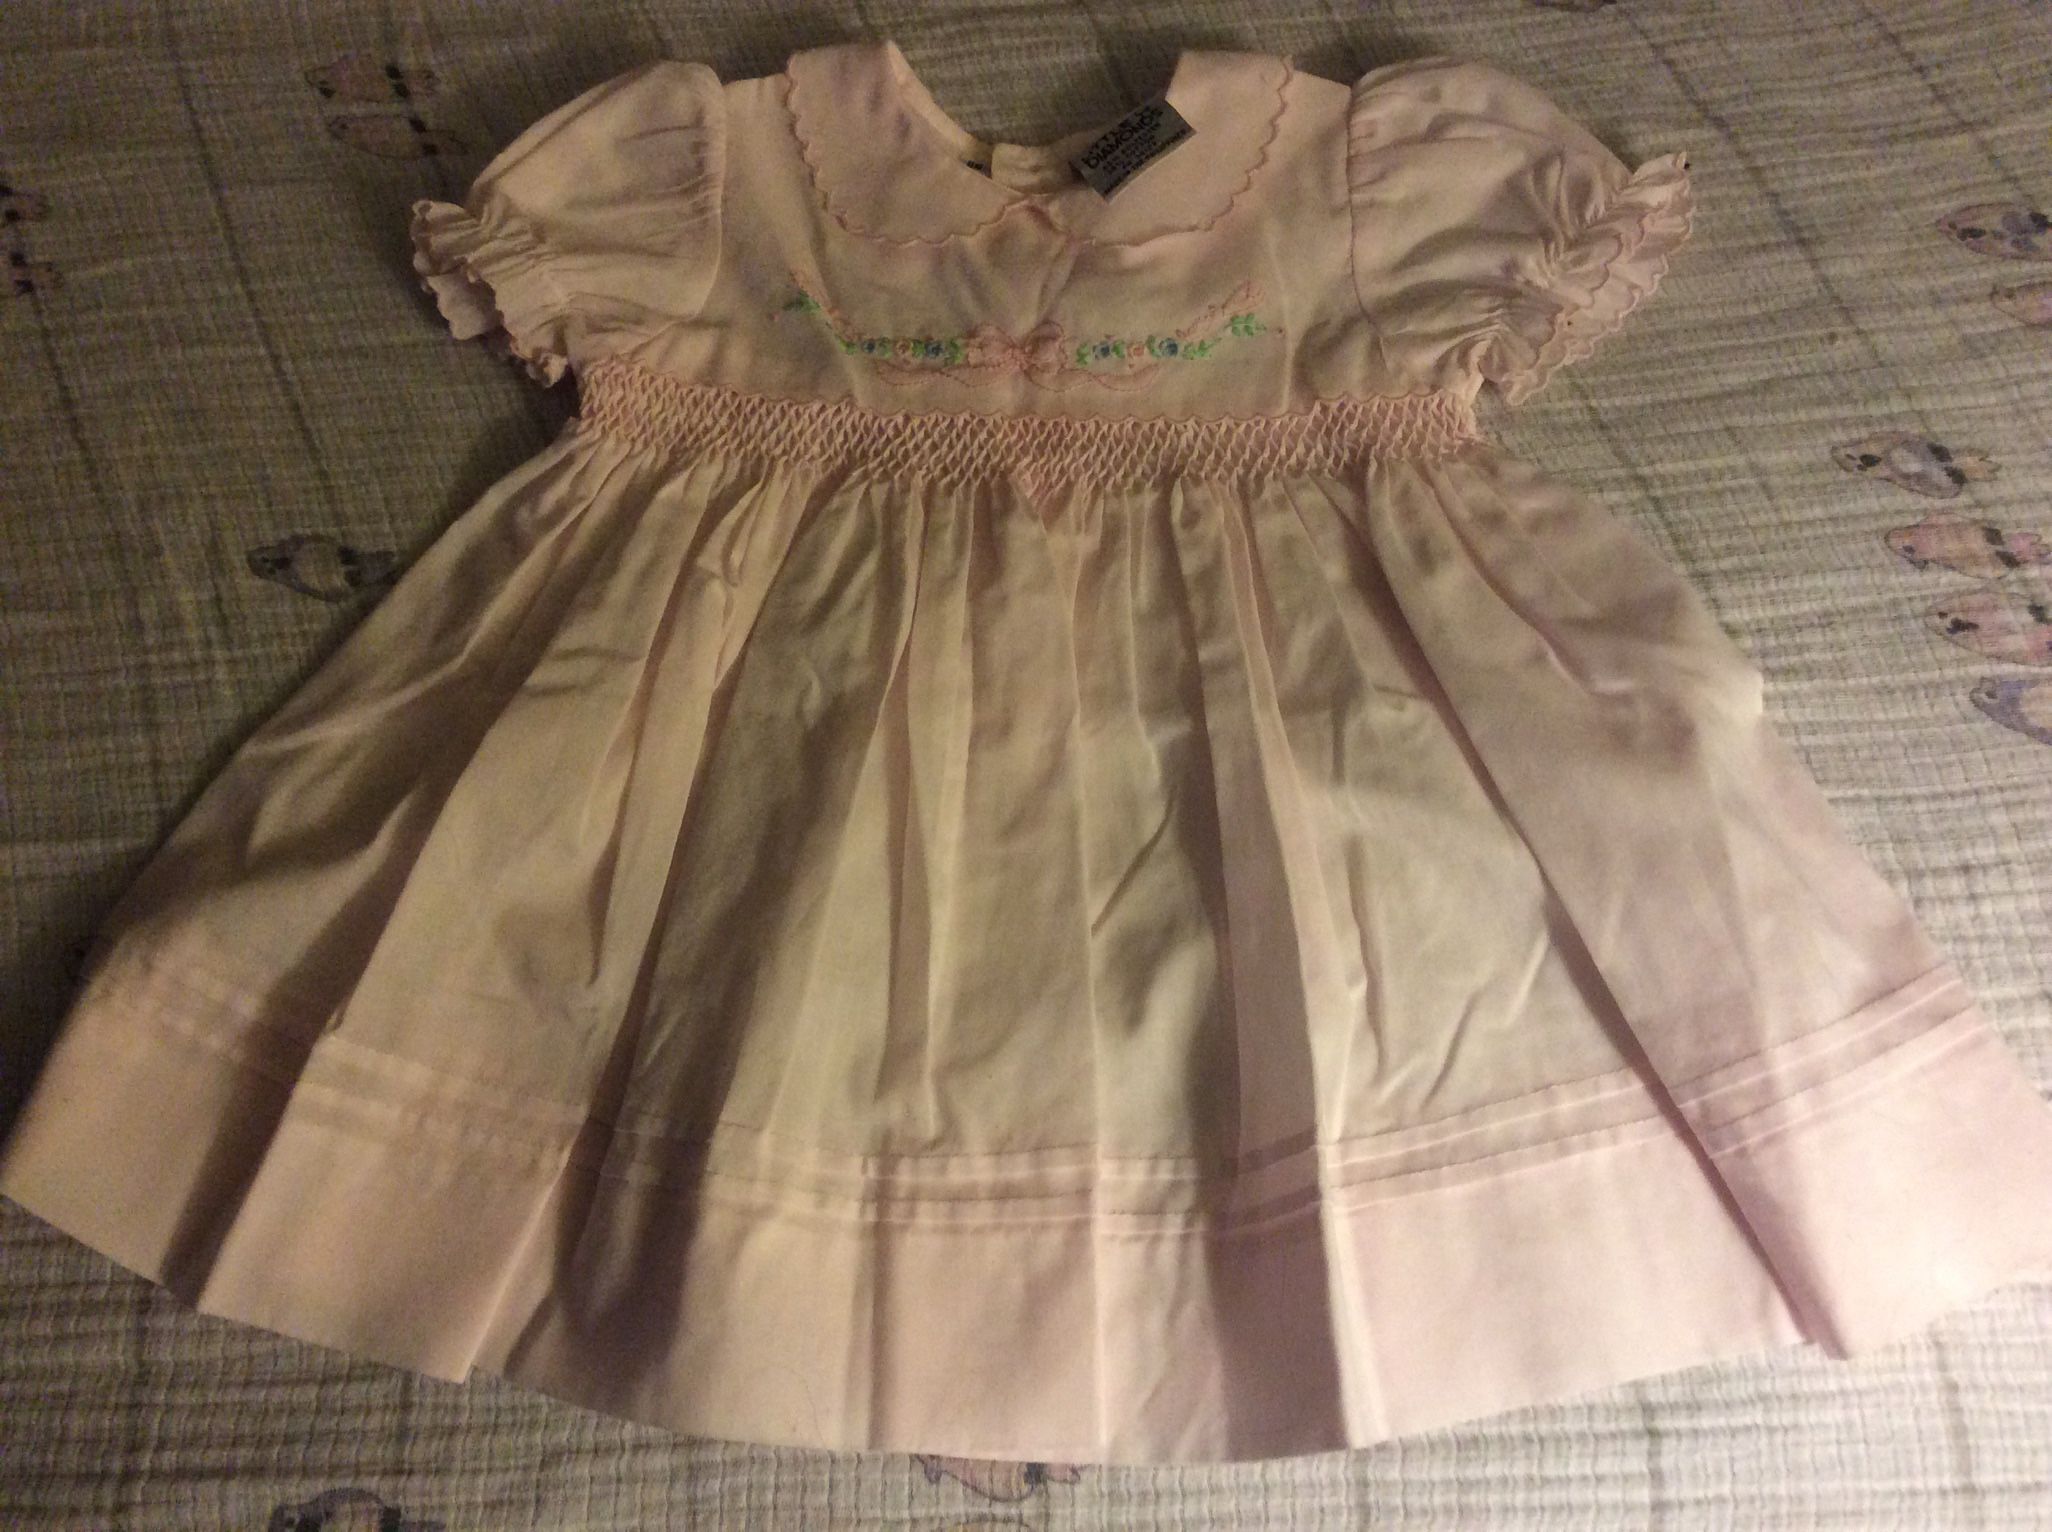 Little Diamonds Pink Dress 9 Months Has Smocking And Embroidery  Like New Condition  New Price Was $49.00